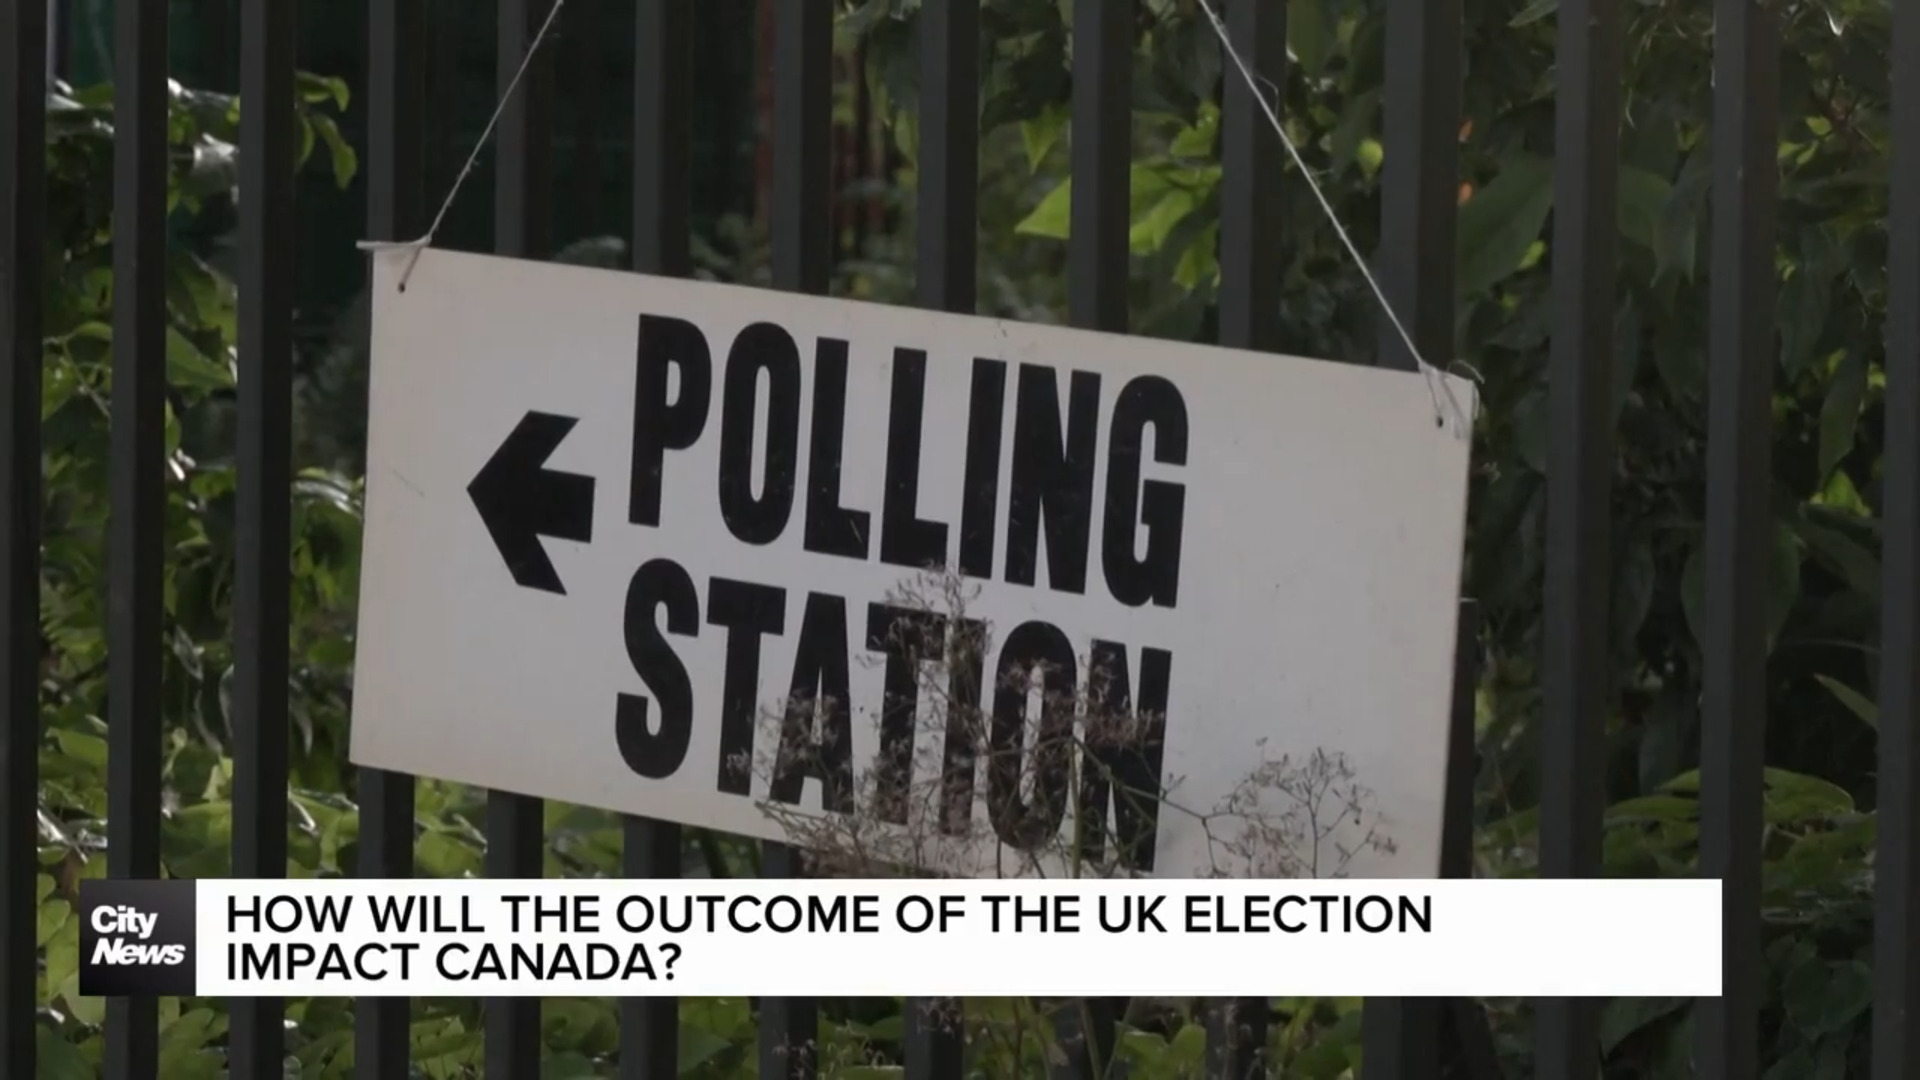 How will the outcome of the UK election impact Canada?